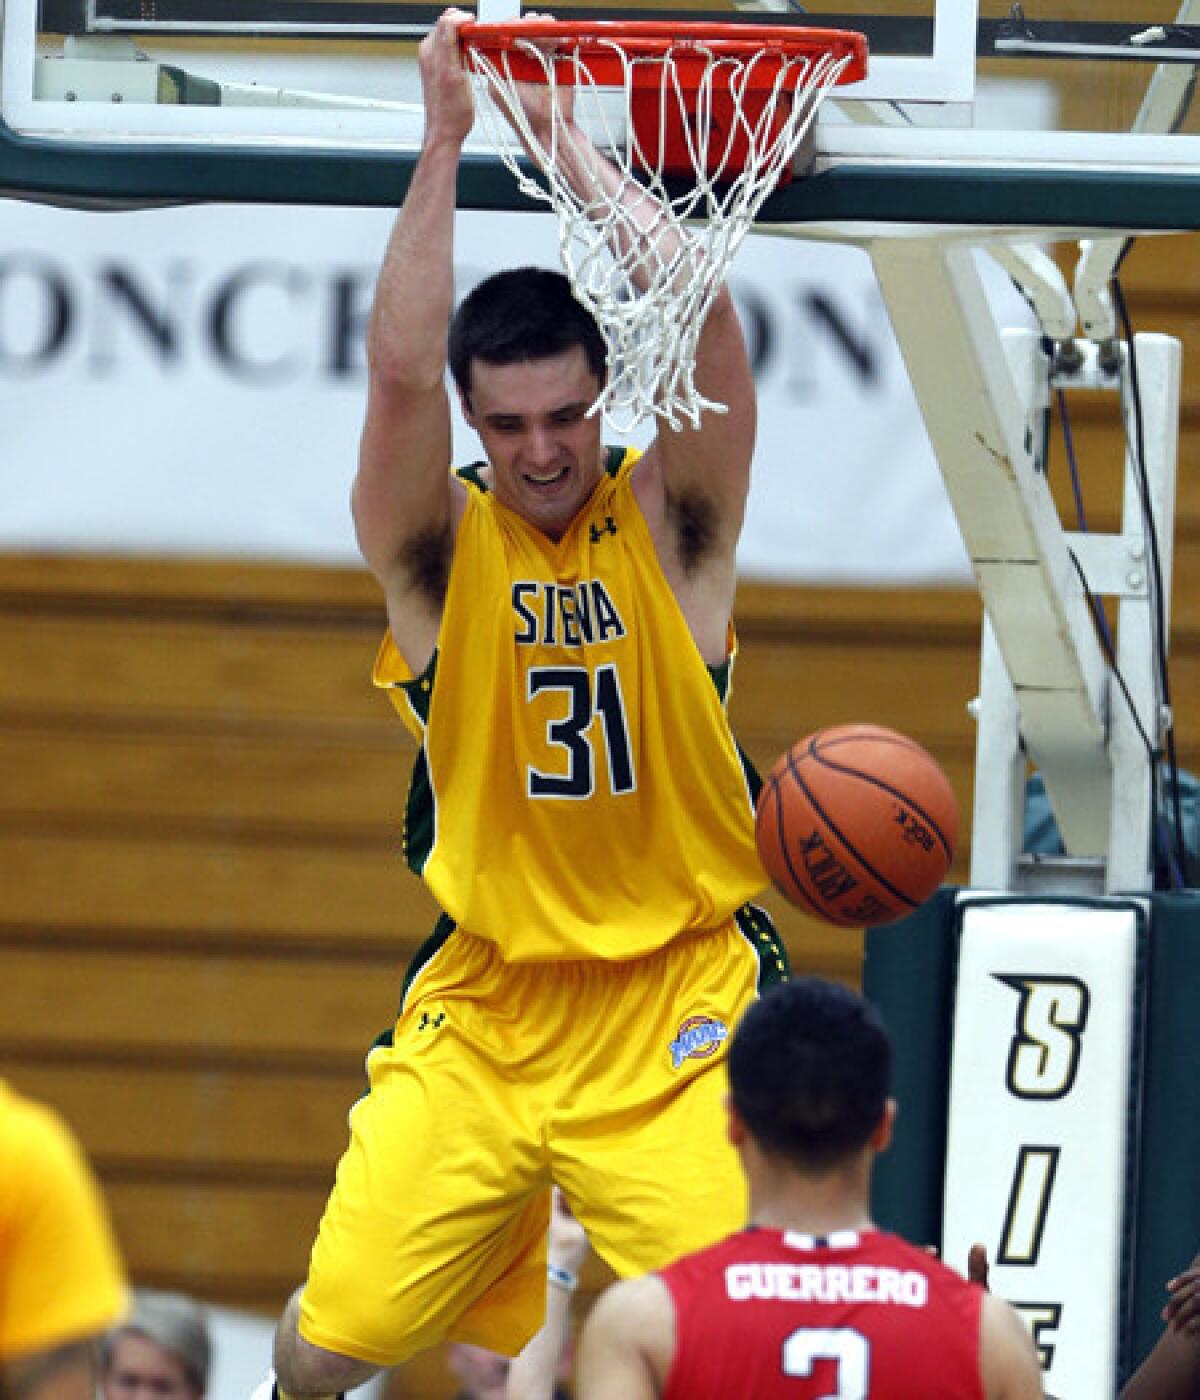 Siena's Brett Bisping, shown dunking during Game 2 of the CBI championship series, had 20 points and nine rebounds in the deciding game Saturday.